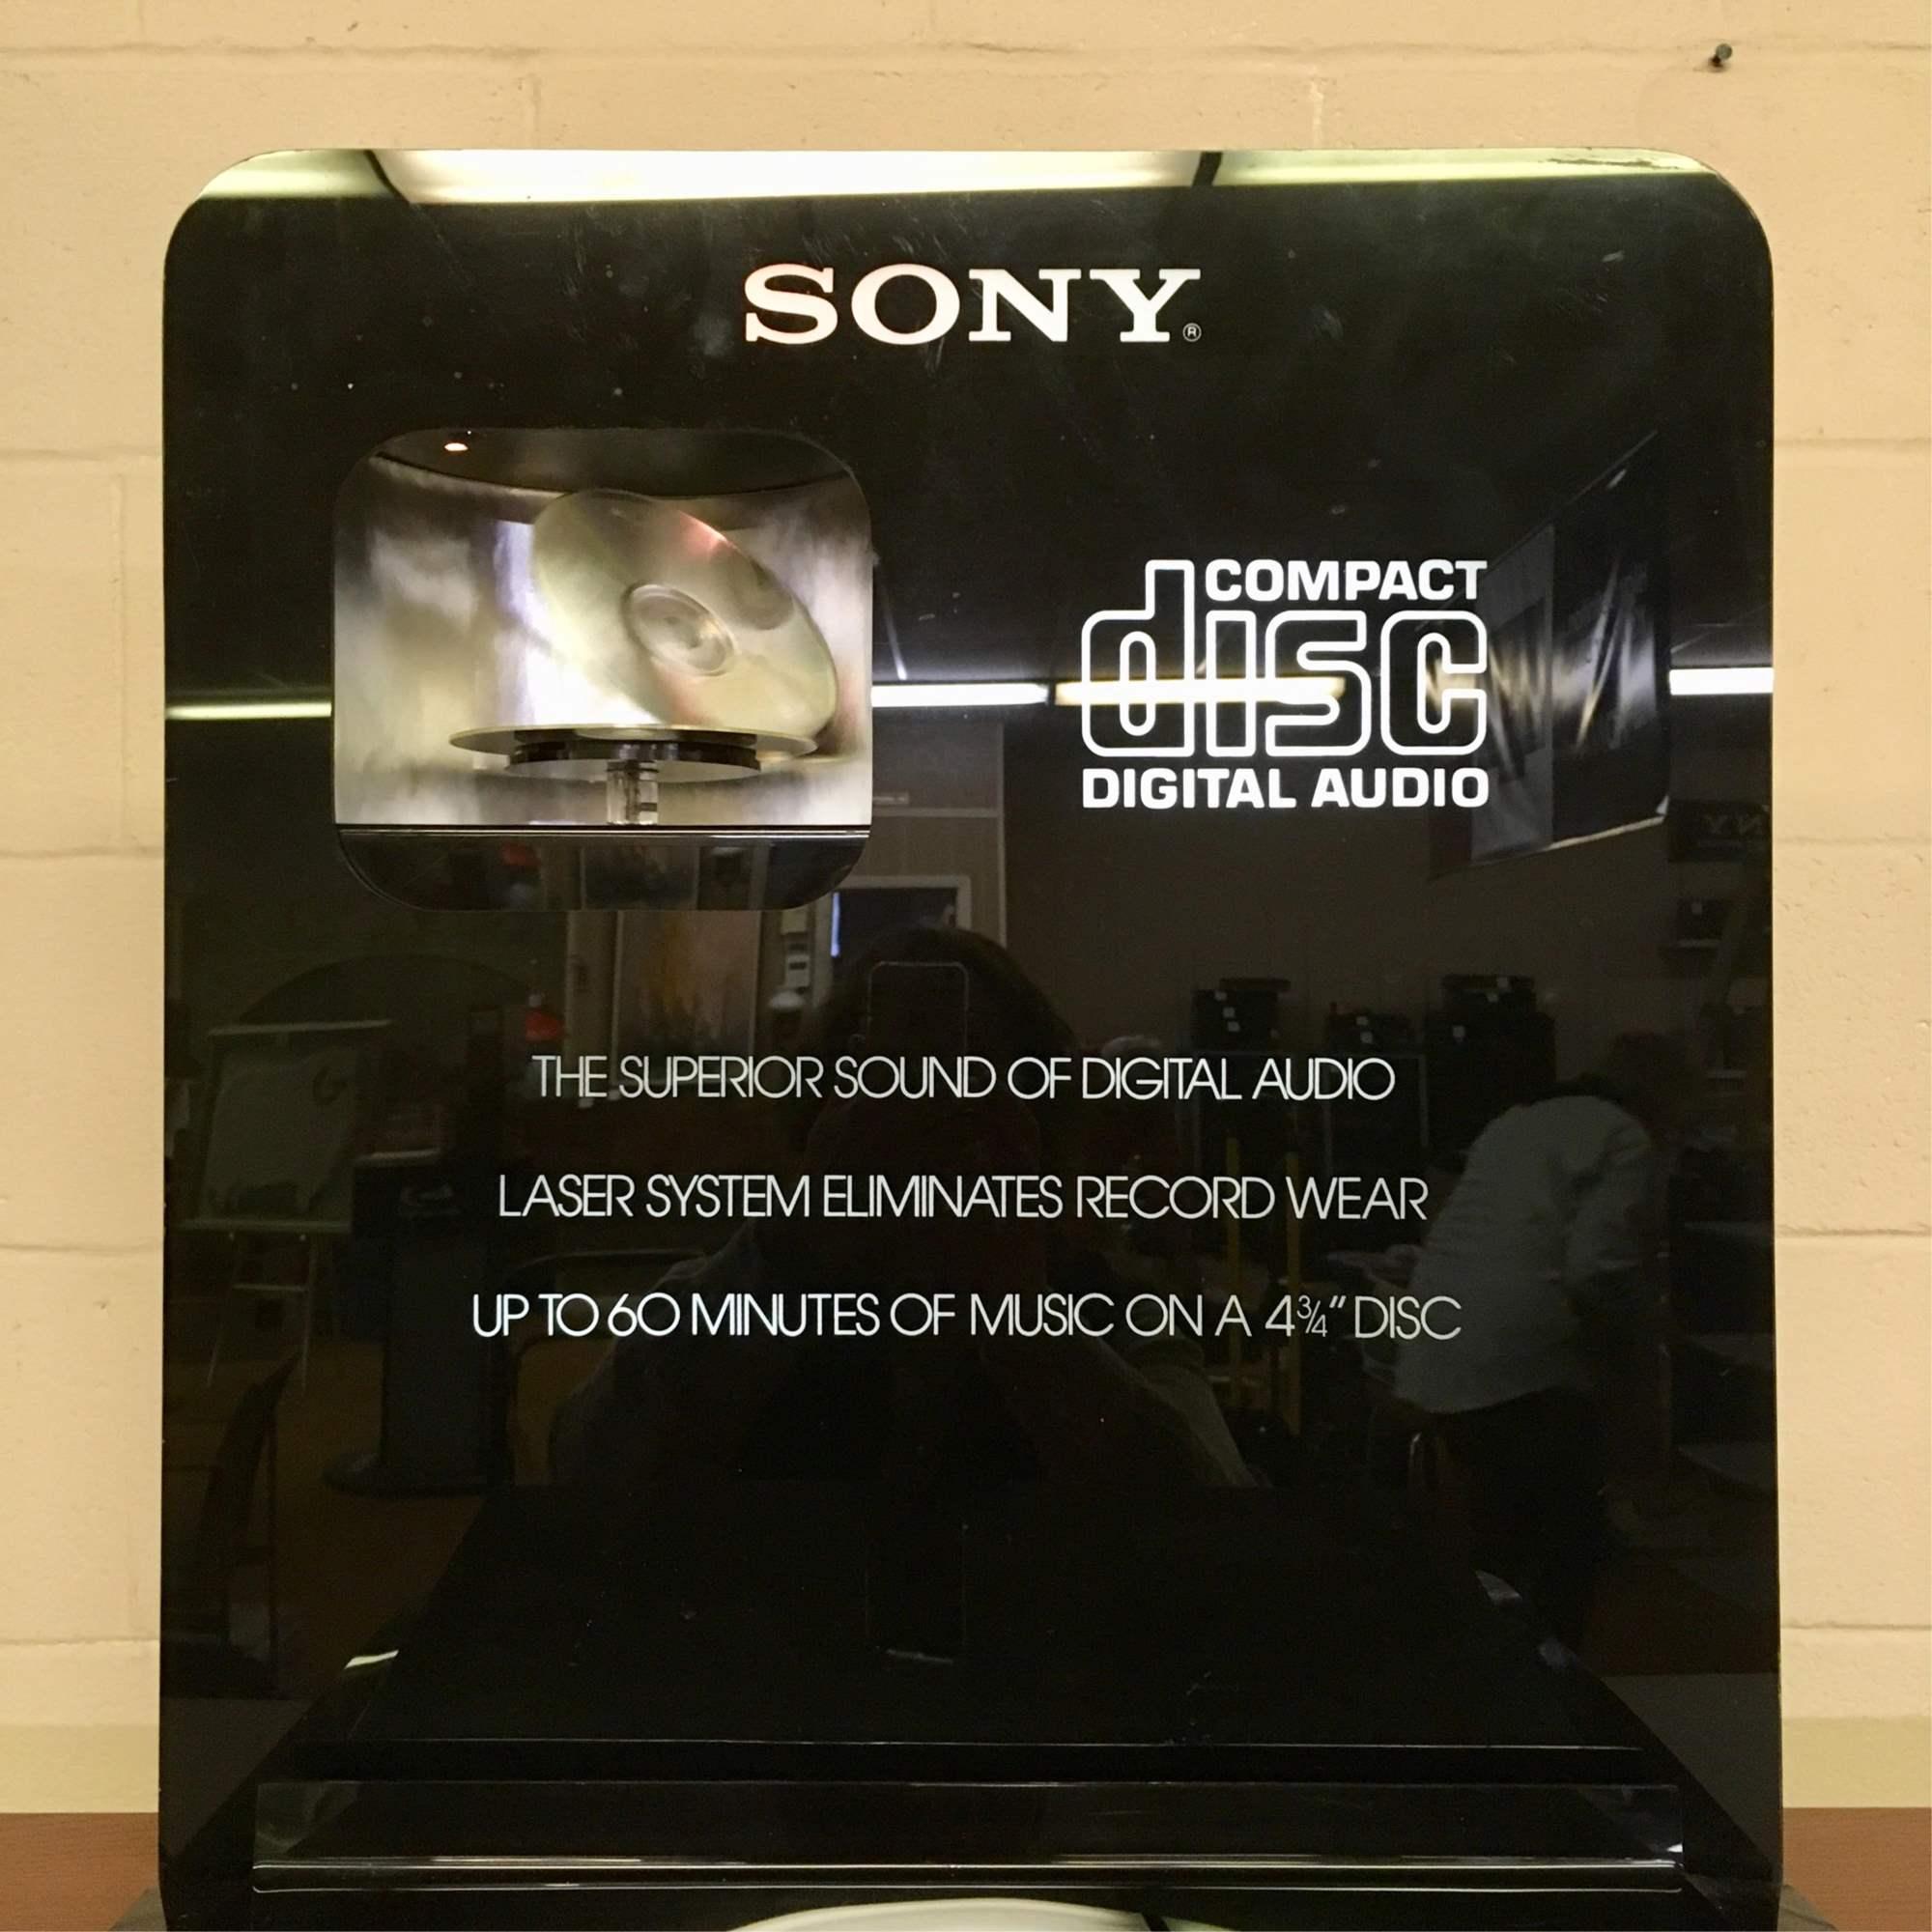 Sony Compact Disc Advertising Display